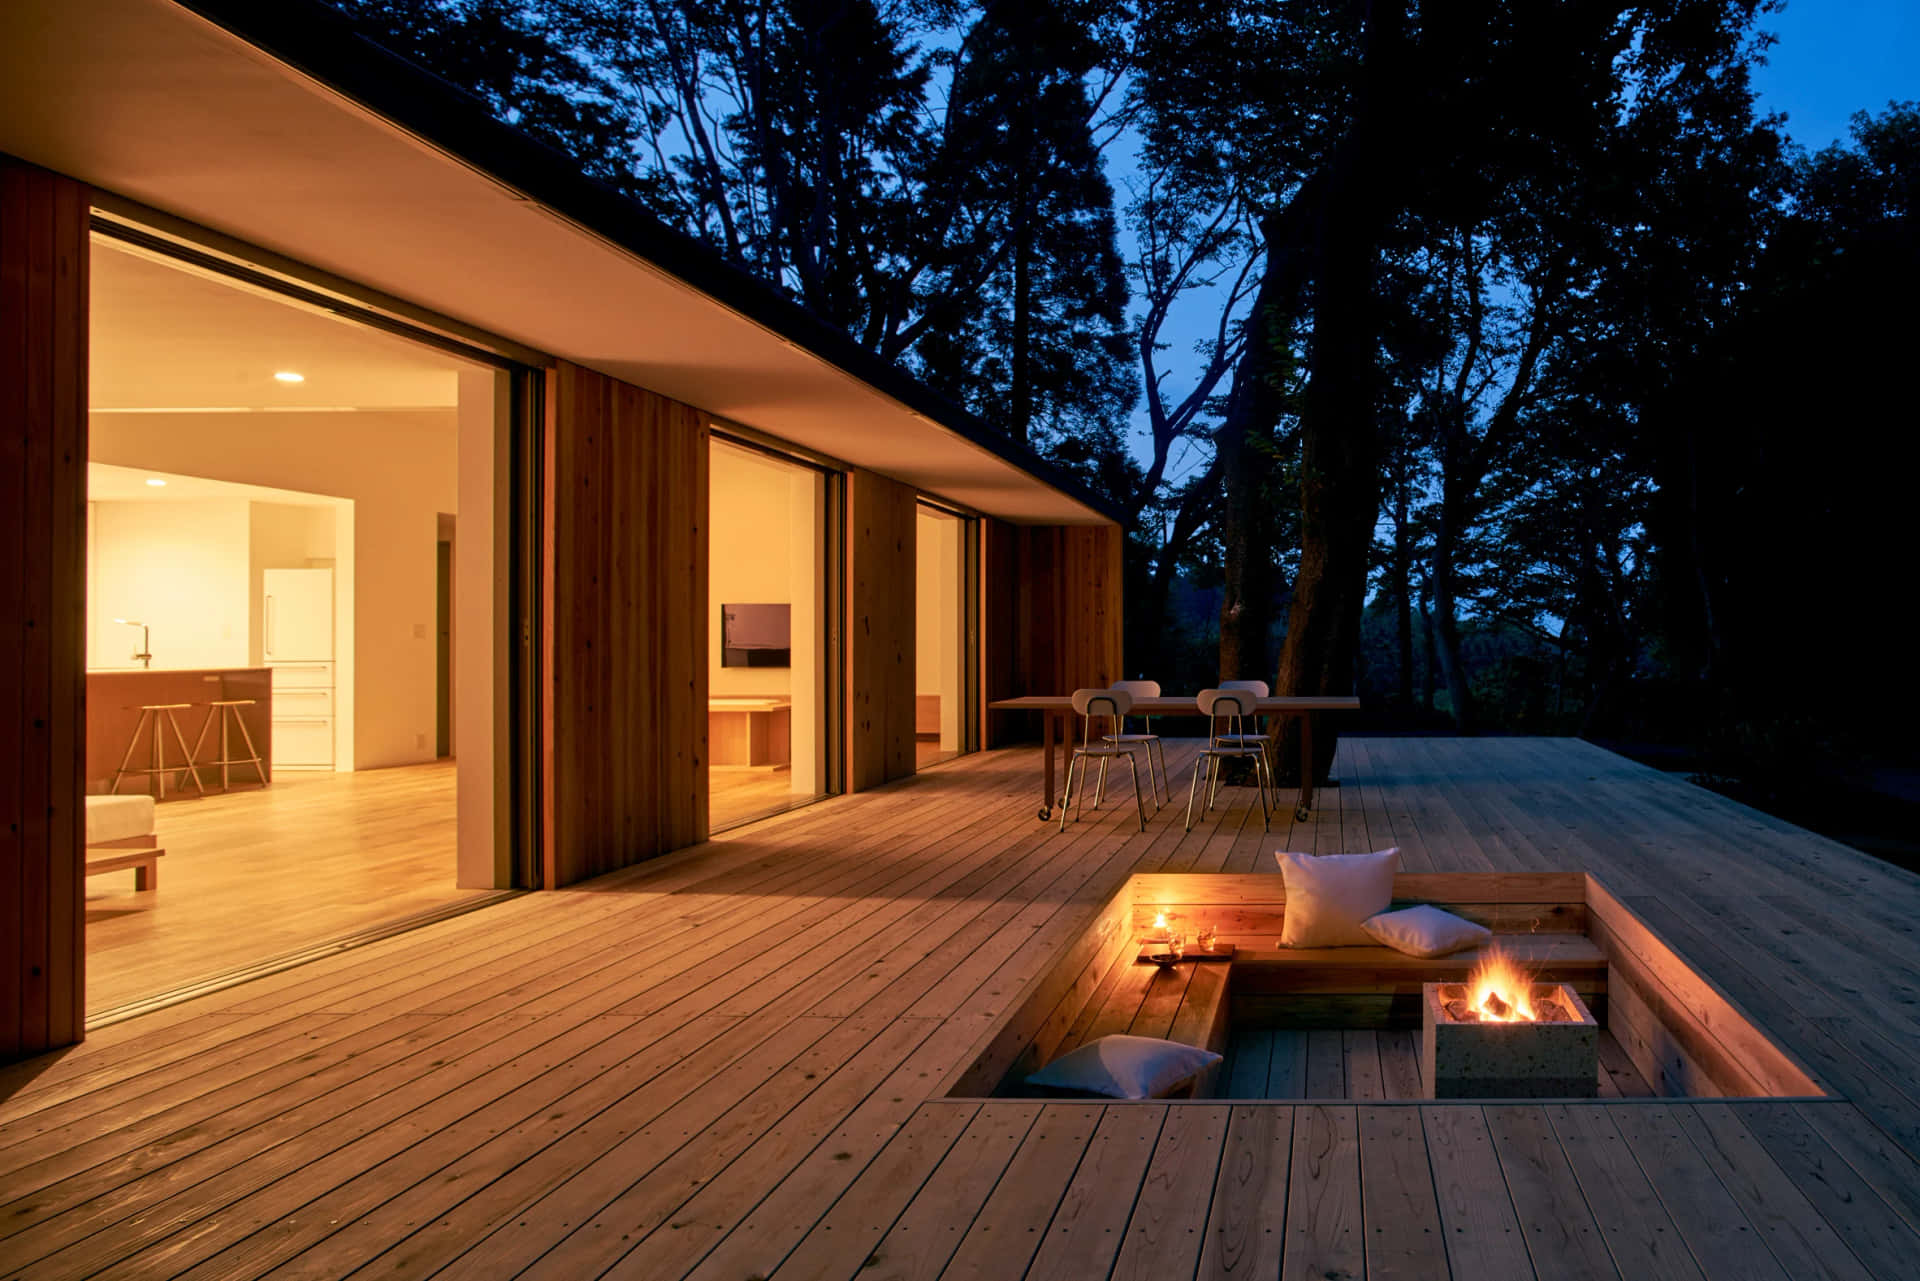 A Wooden Deck With A Fire Pit In The Evening